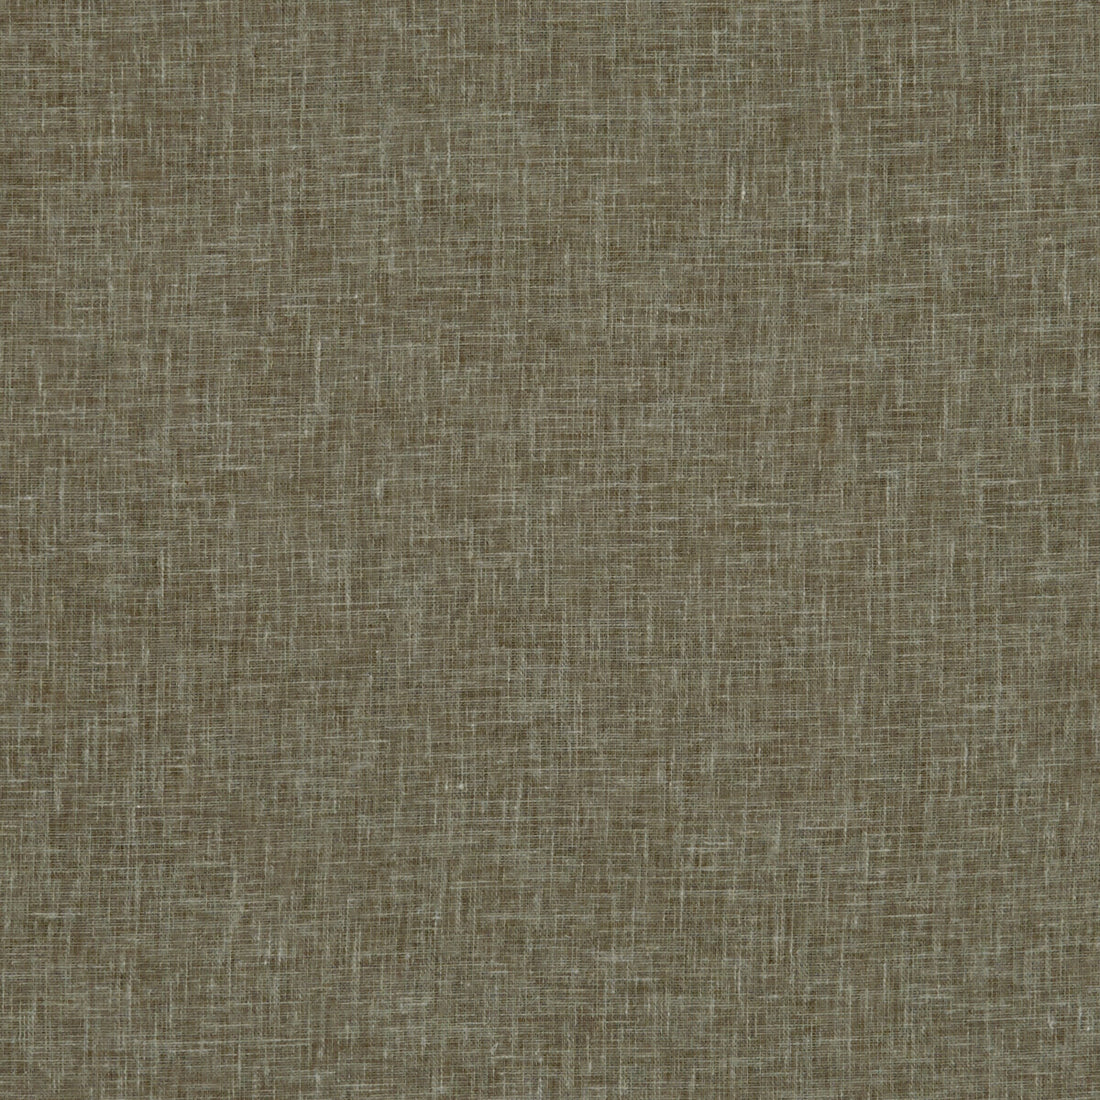 Midori fabric in truffle color - pattern F1068/47.CAC.0 - by Clarke And Clarke in the Clarke &amp; Clarke Midori collection